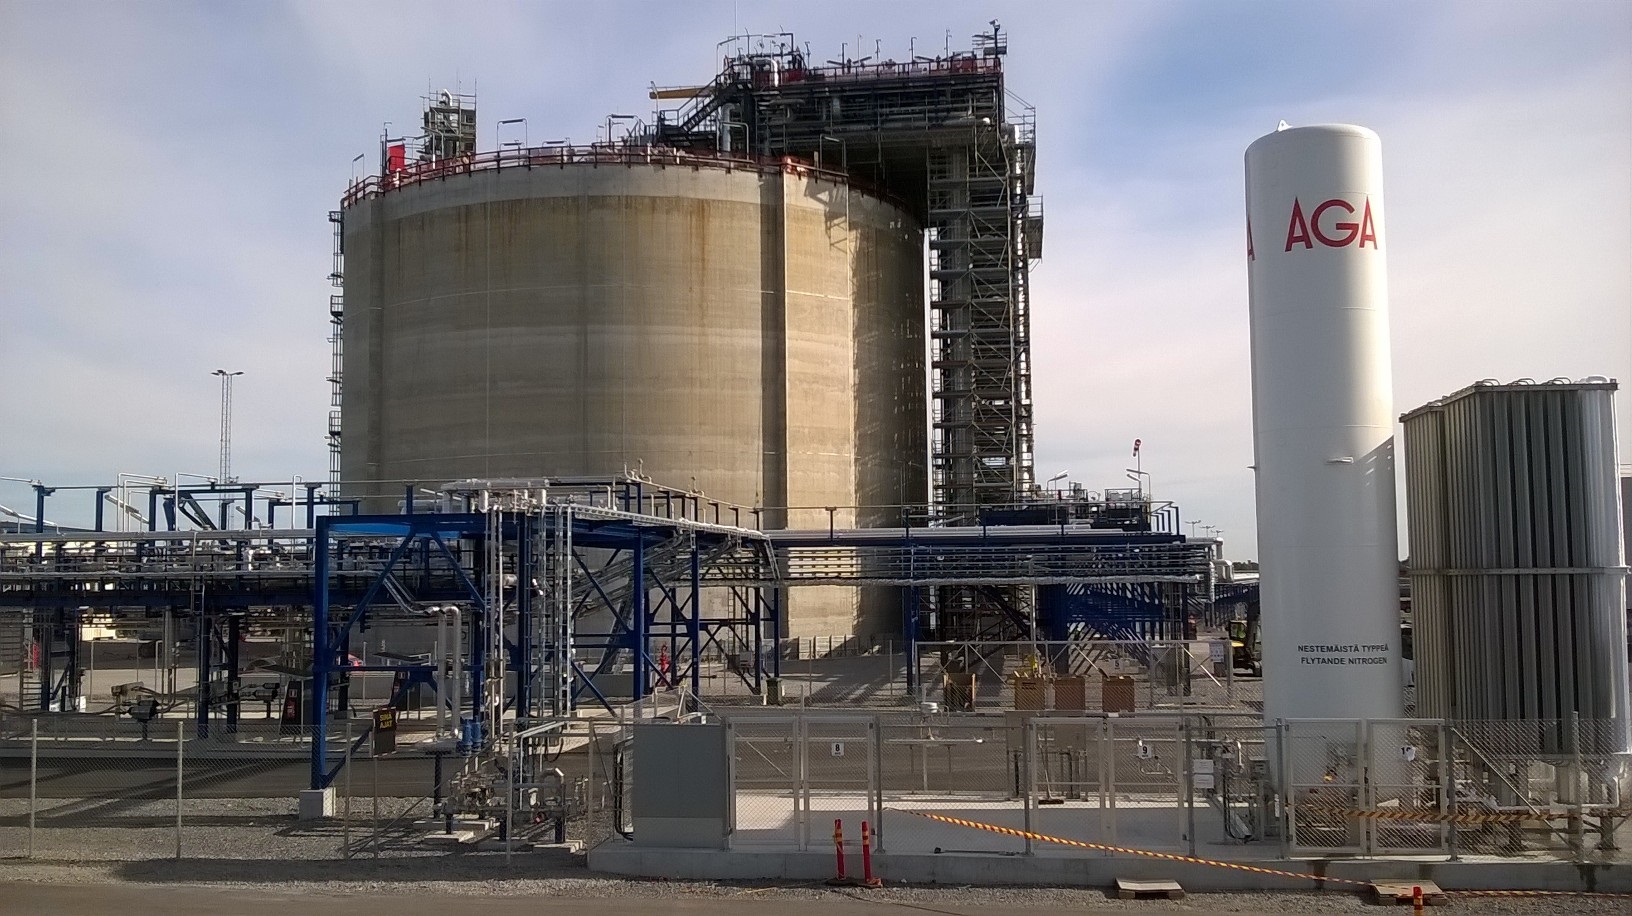 FCC Industrial has participated in the tank construction of the first liquefied natural gas (lng) plant in Finland